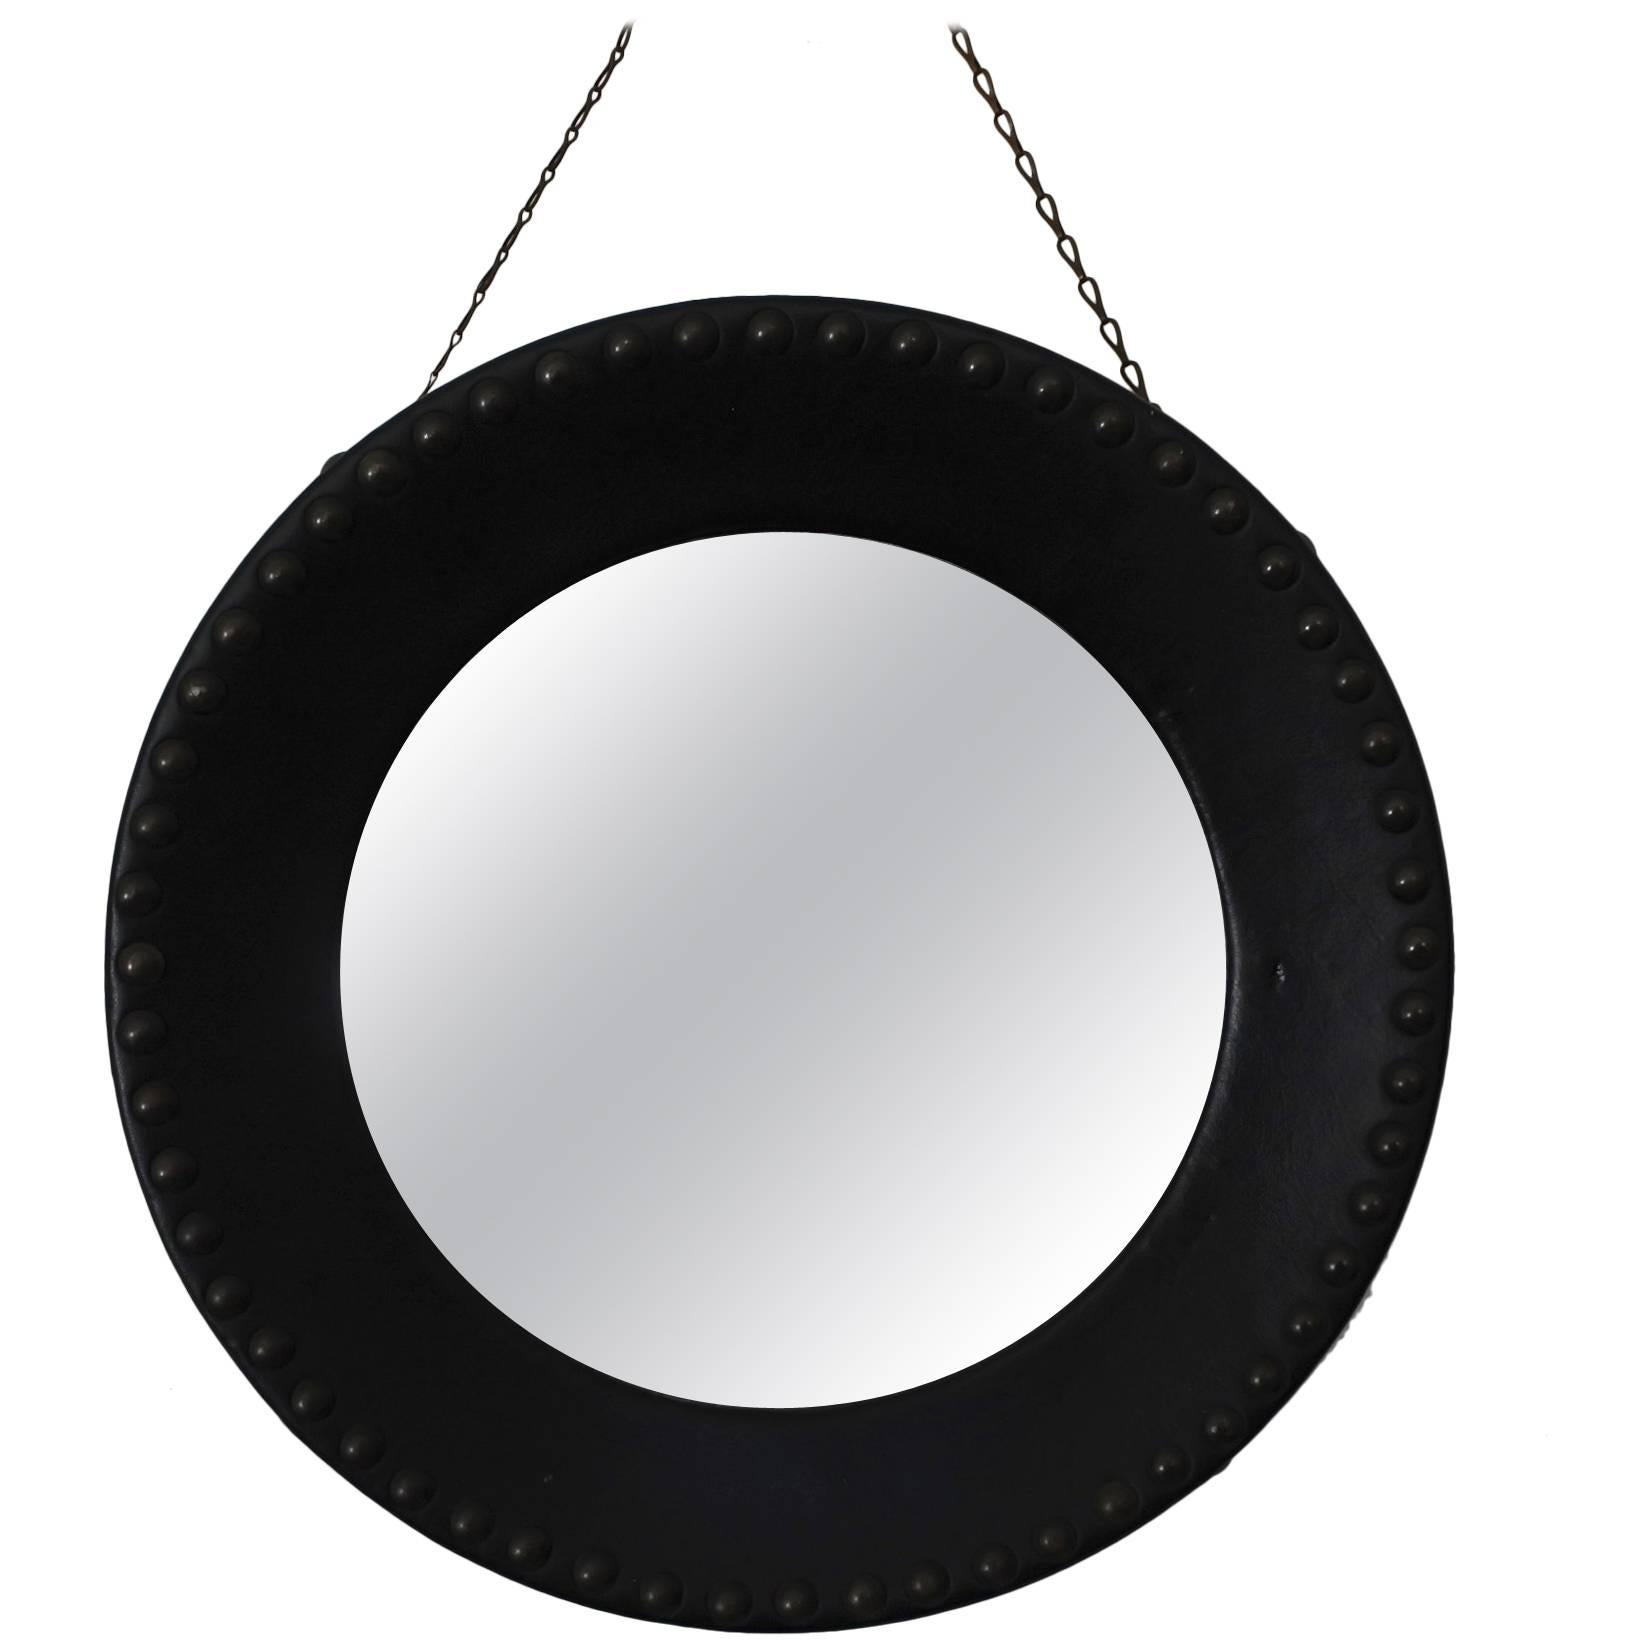 Midcentury Round Wall Convex Mirror in the Manner of Jacques Adnet, France 1950